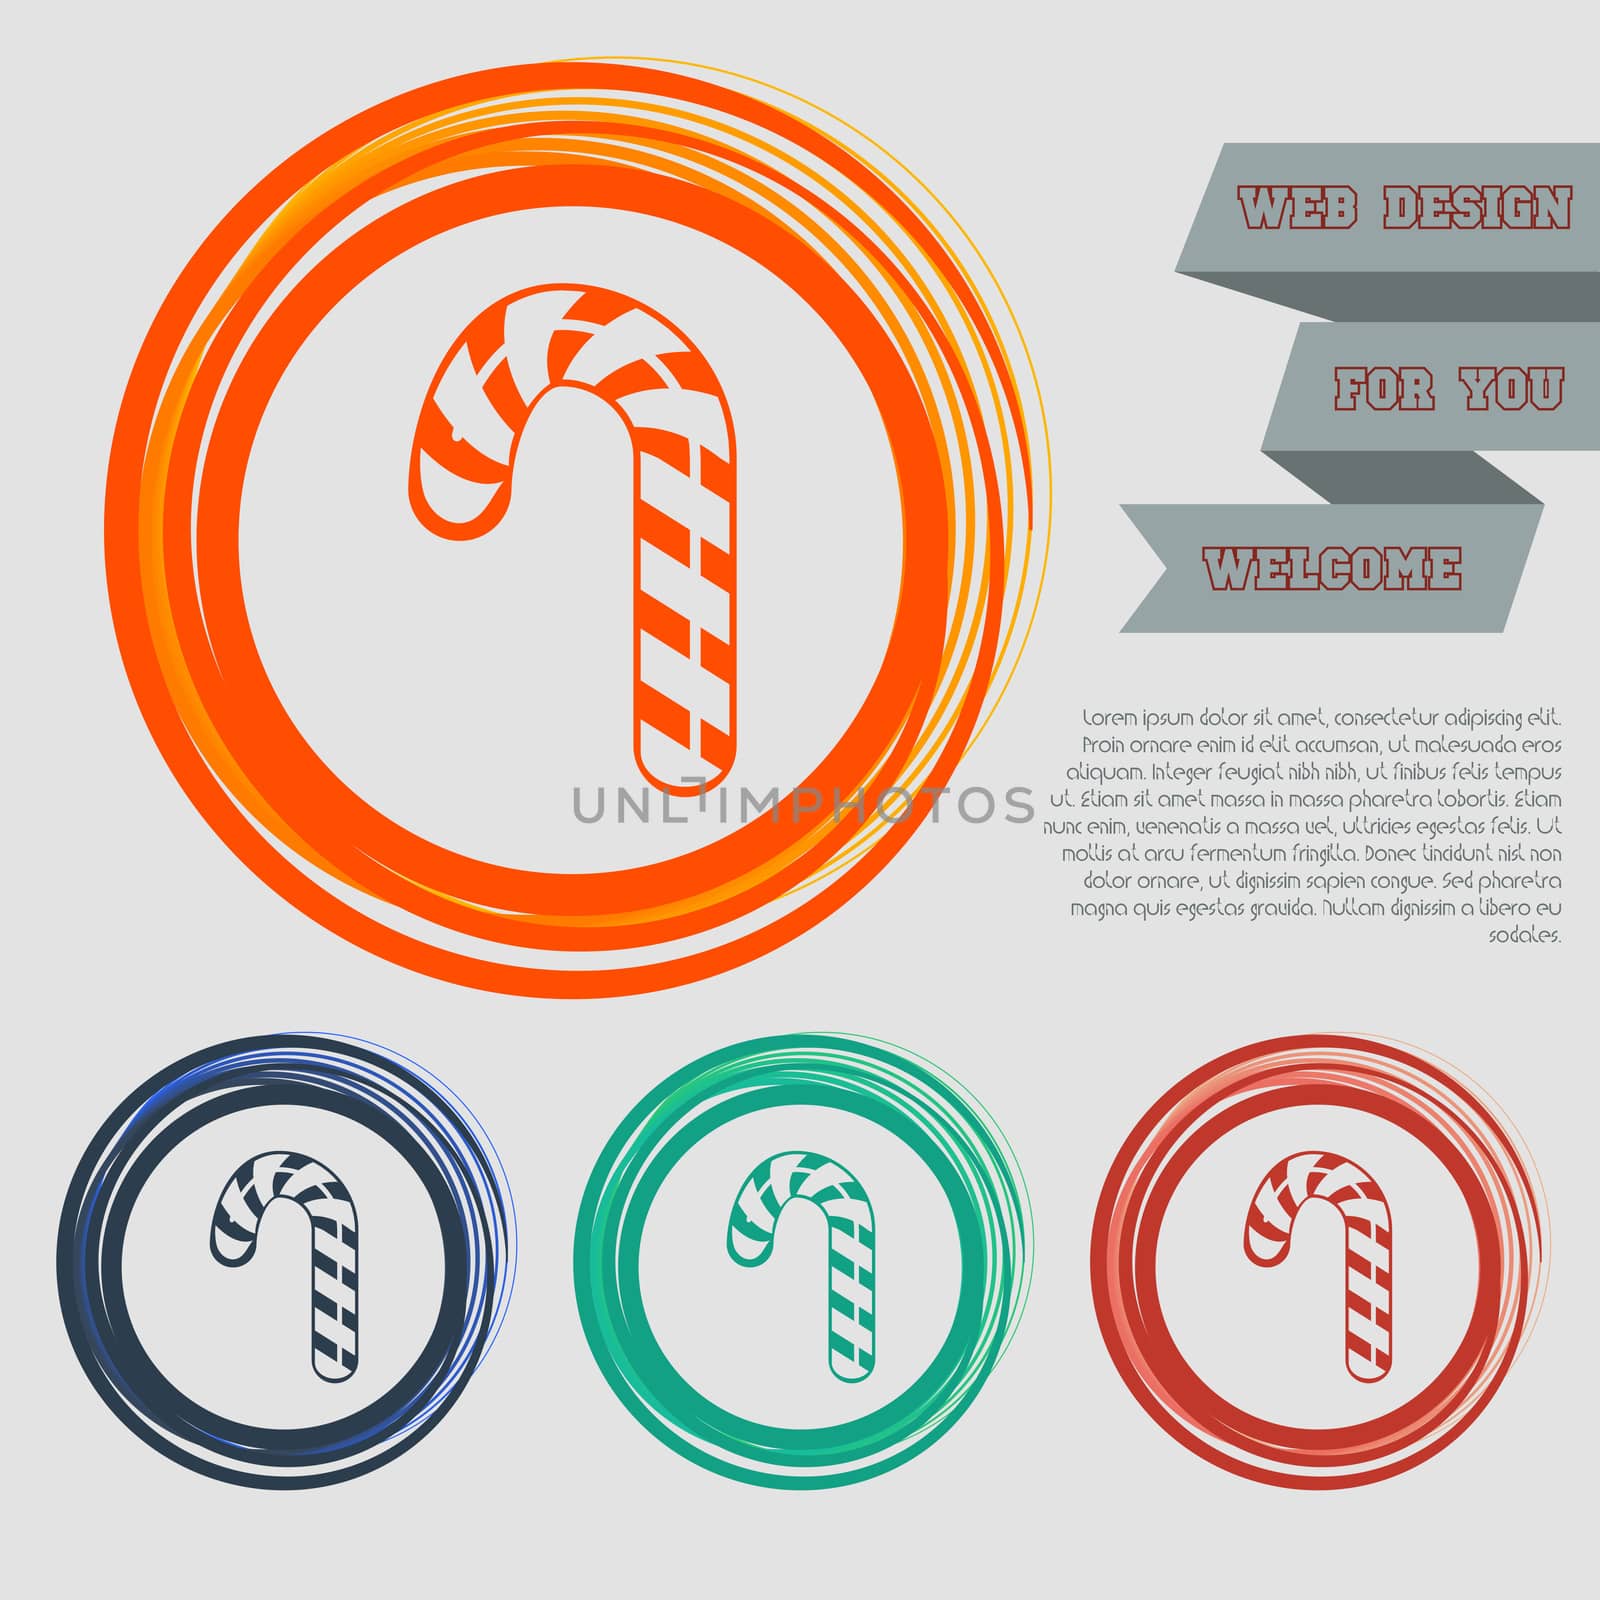 Christmas peppermint candy cane with stripes icon on the red, blue, green, orange buttons for your website and design space text.  by Adamchuk